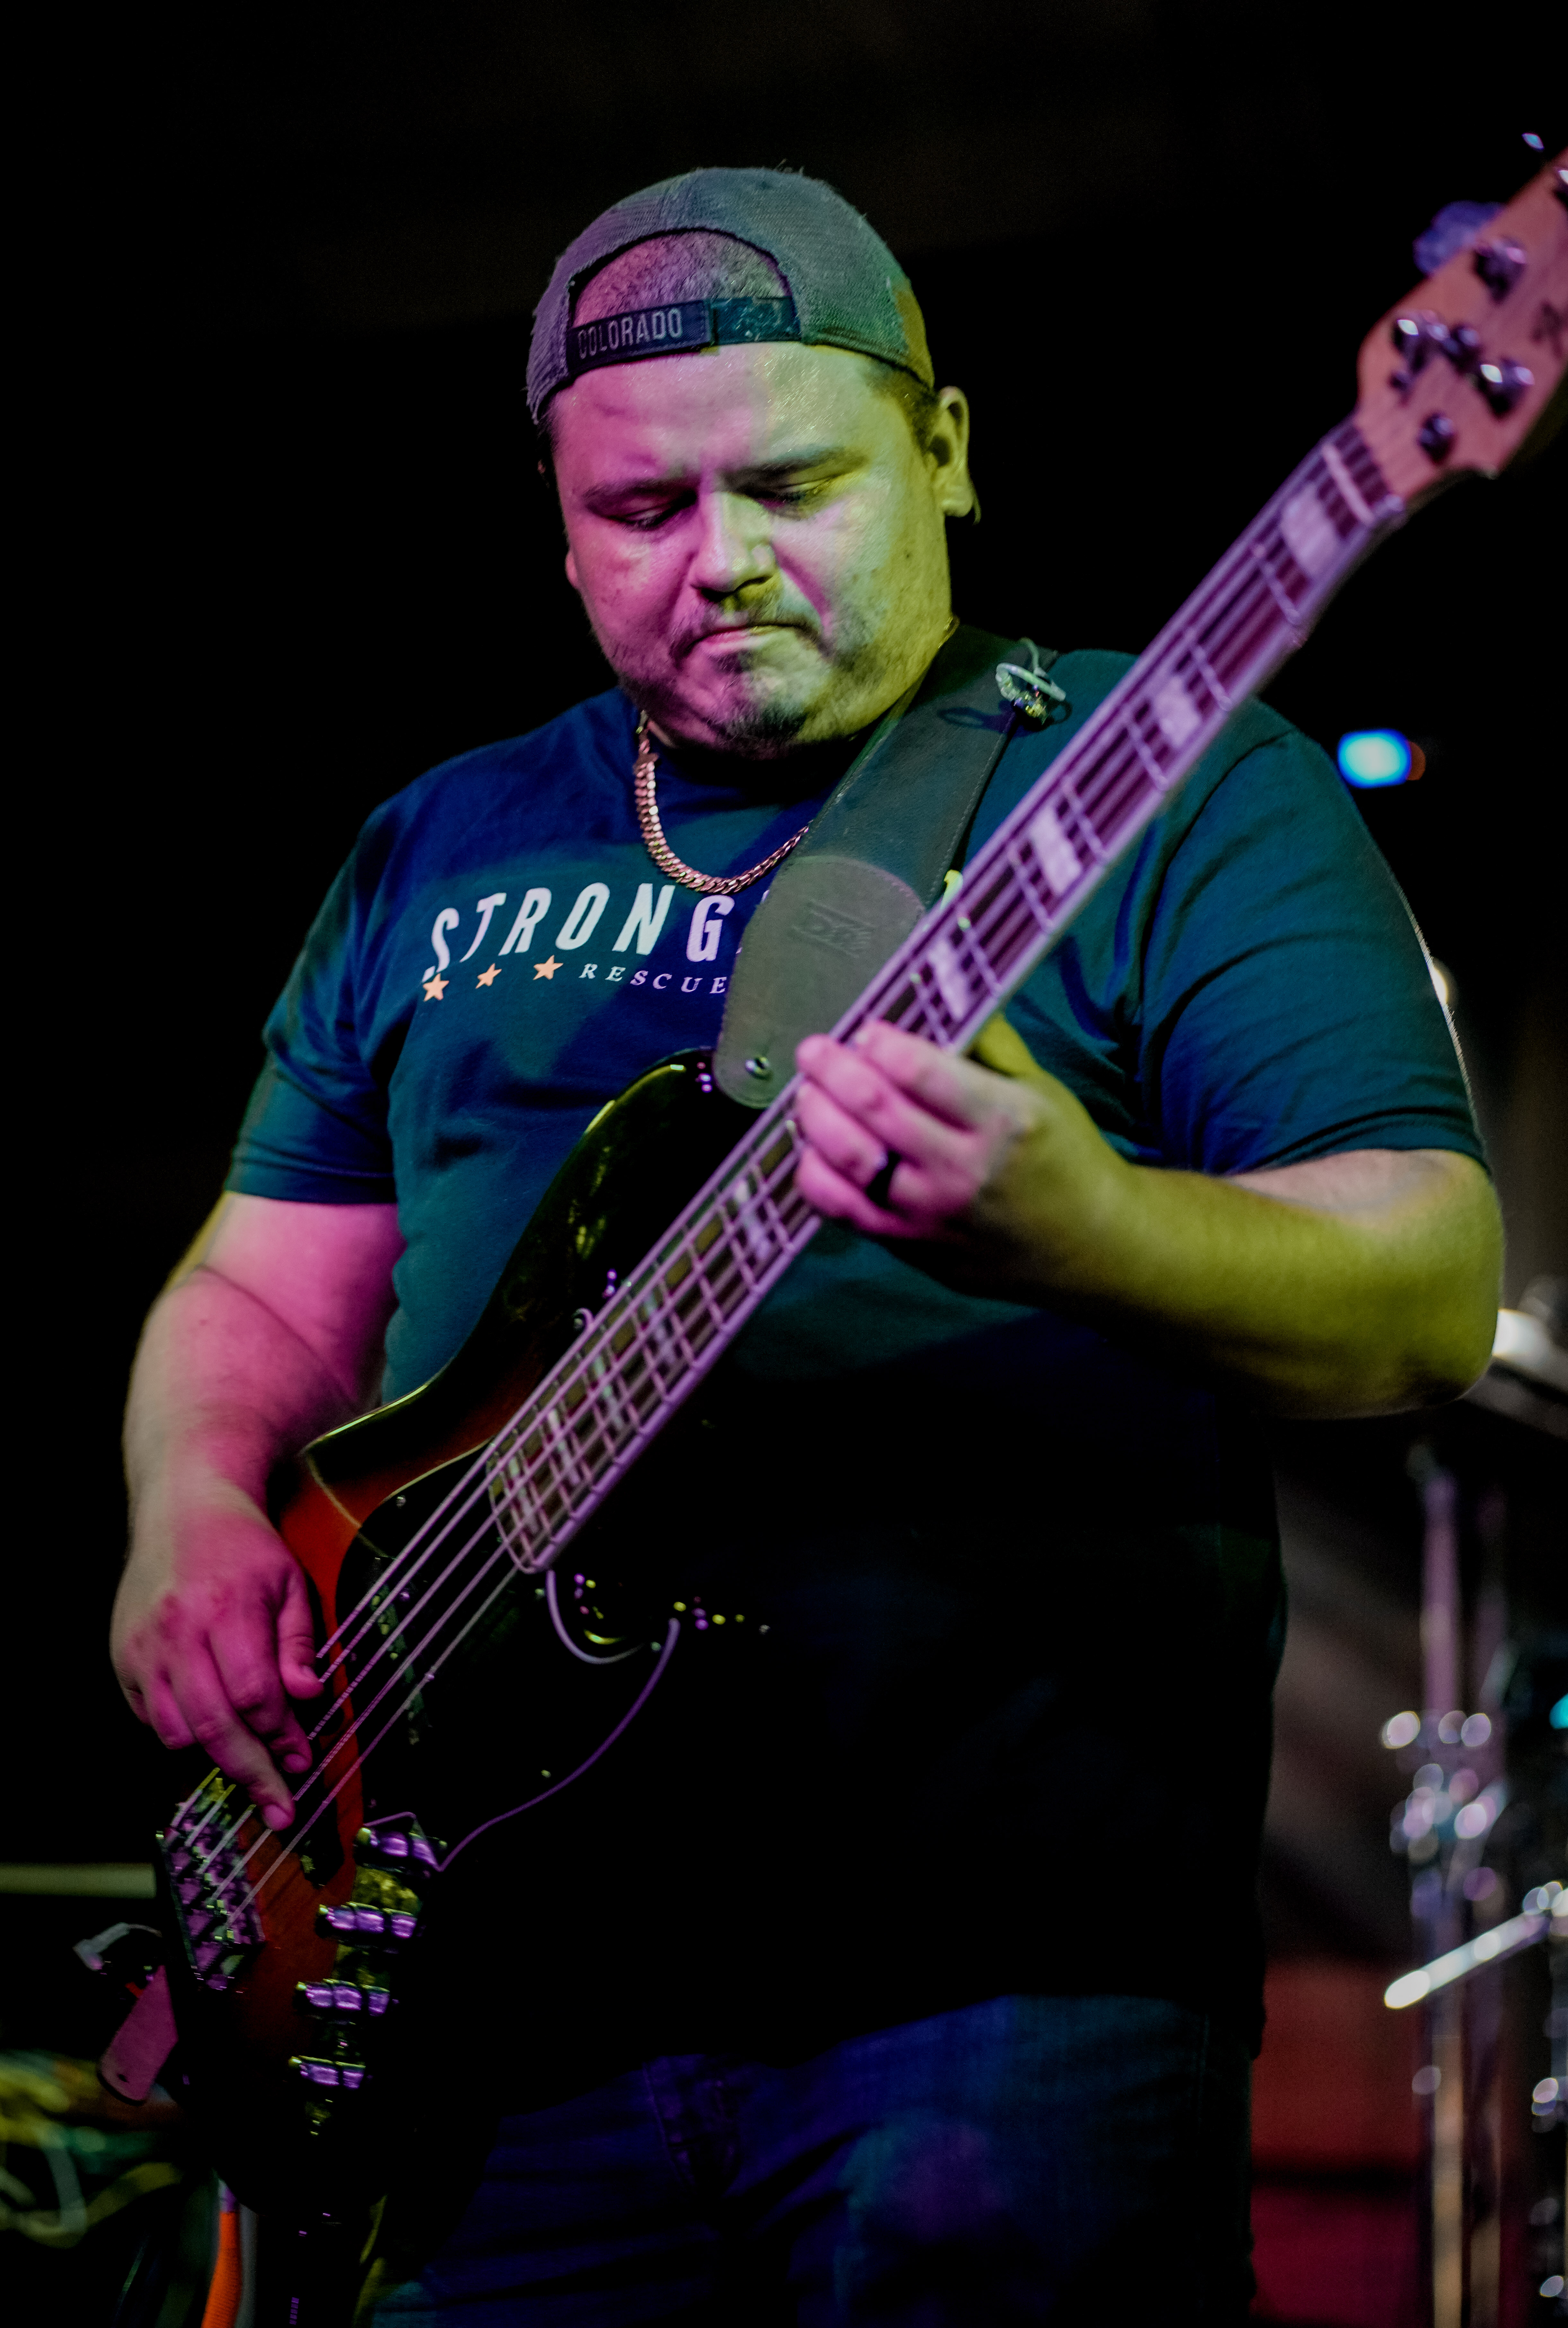 A bassist on stage